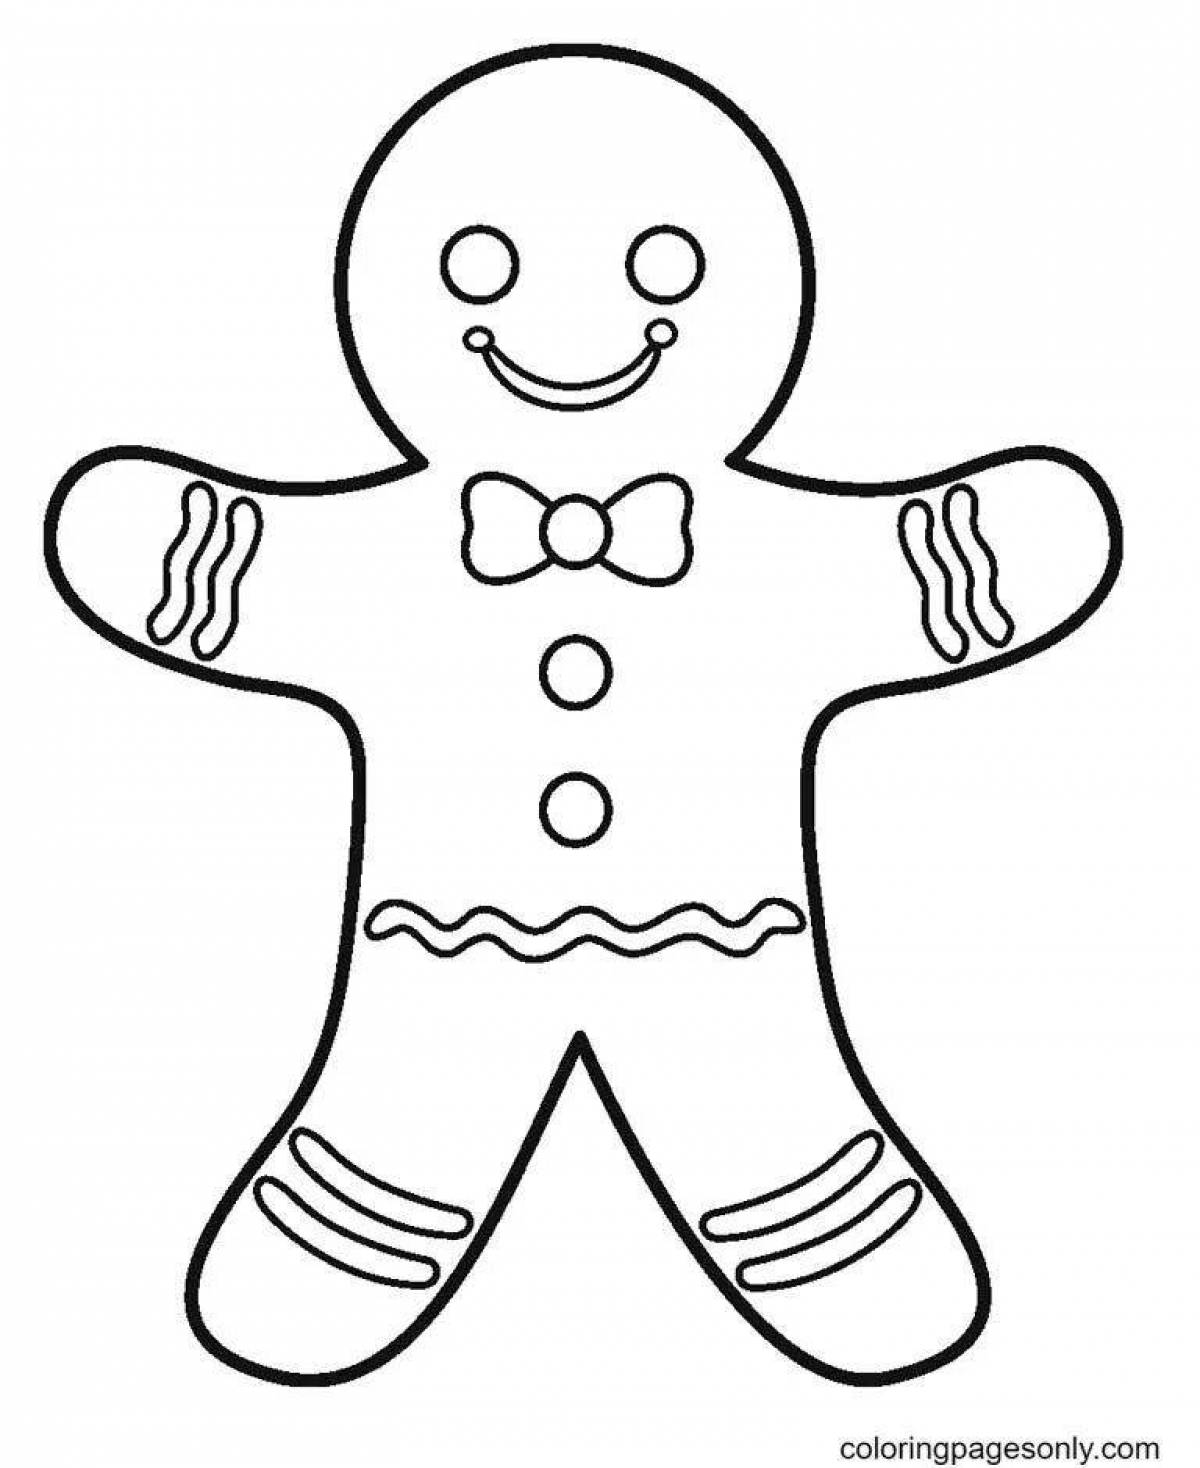 Glowing gingerbread coloring page